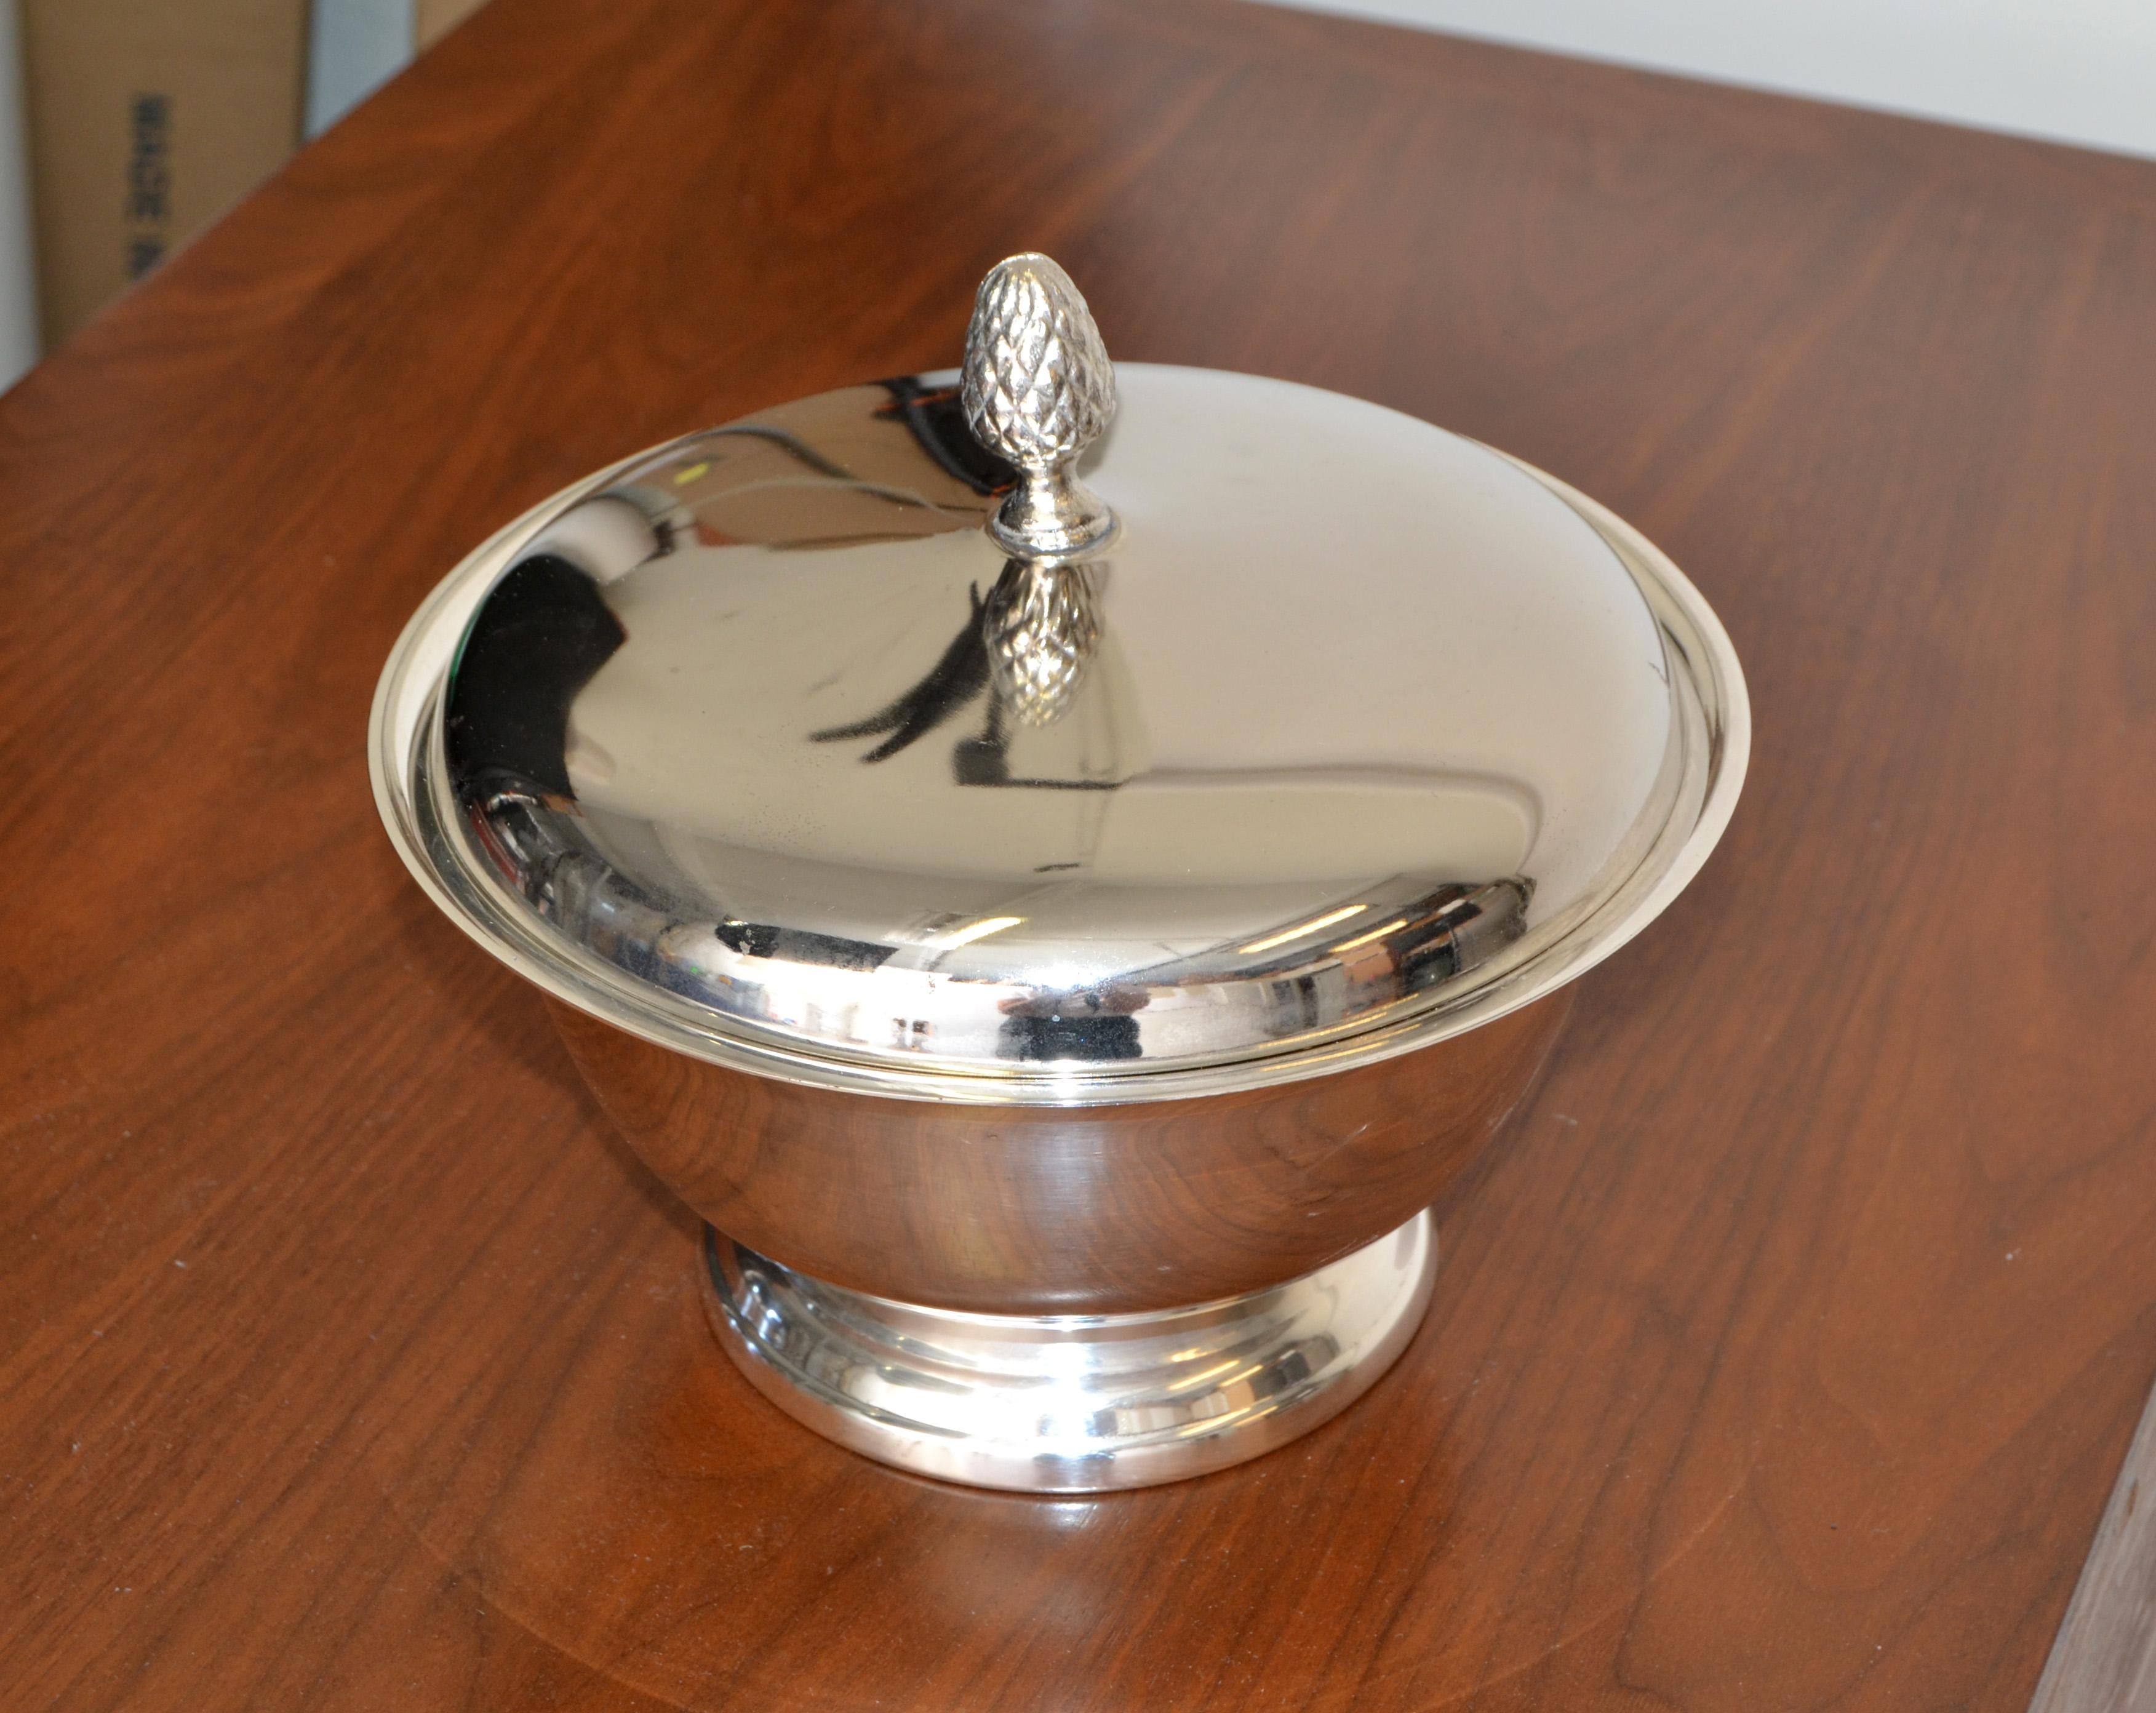 1970th Towle Silversmiths Company produced footed and lidded bowl,designed in the style by Paul Revere.
This is the 8 inches diameter bow with pinecone shaped finial.
Stamped at the base Towle Silver plated with trademark.
In vintage condition